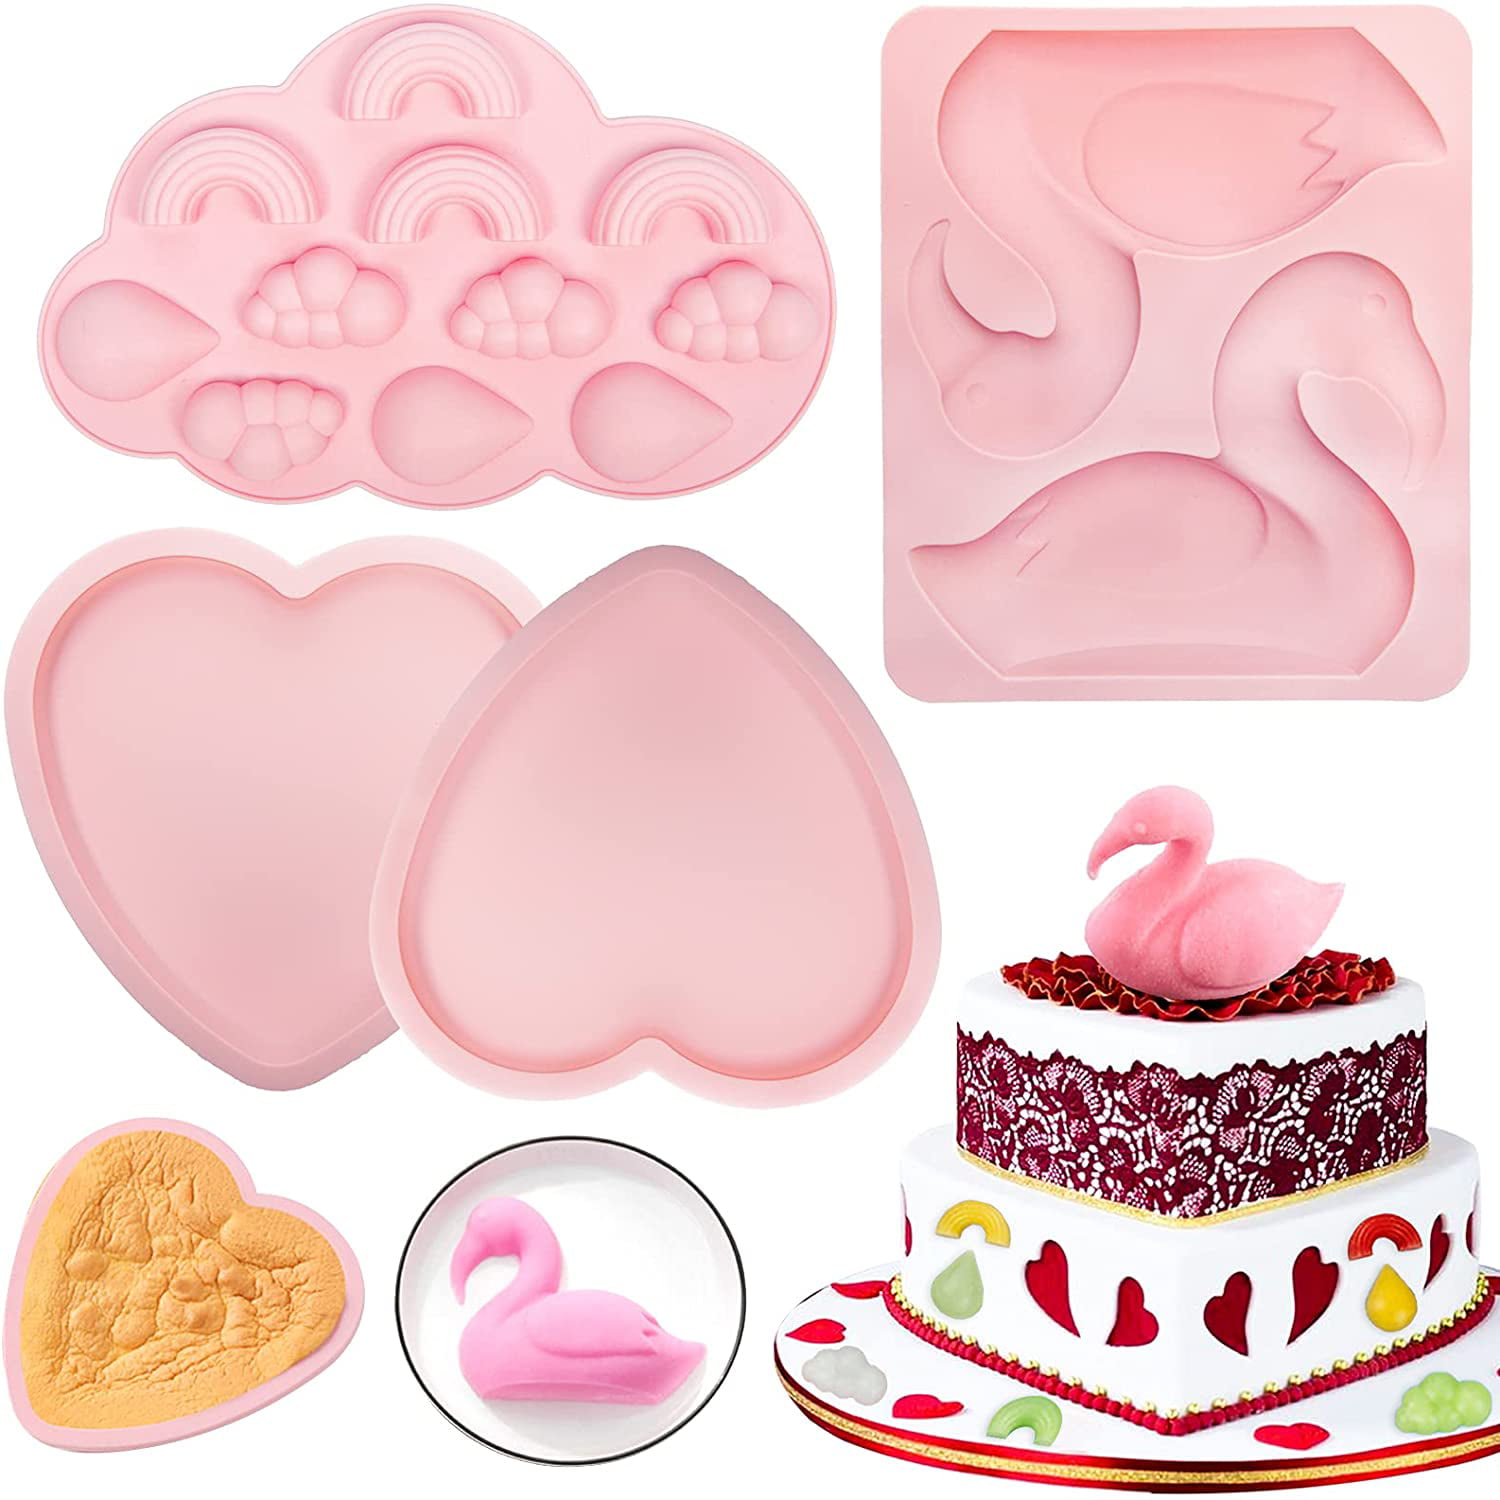 Maker Mold Ice Cube Tray Cake Baking Silicone Chocolate Pudding Mould DIY Tool 